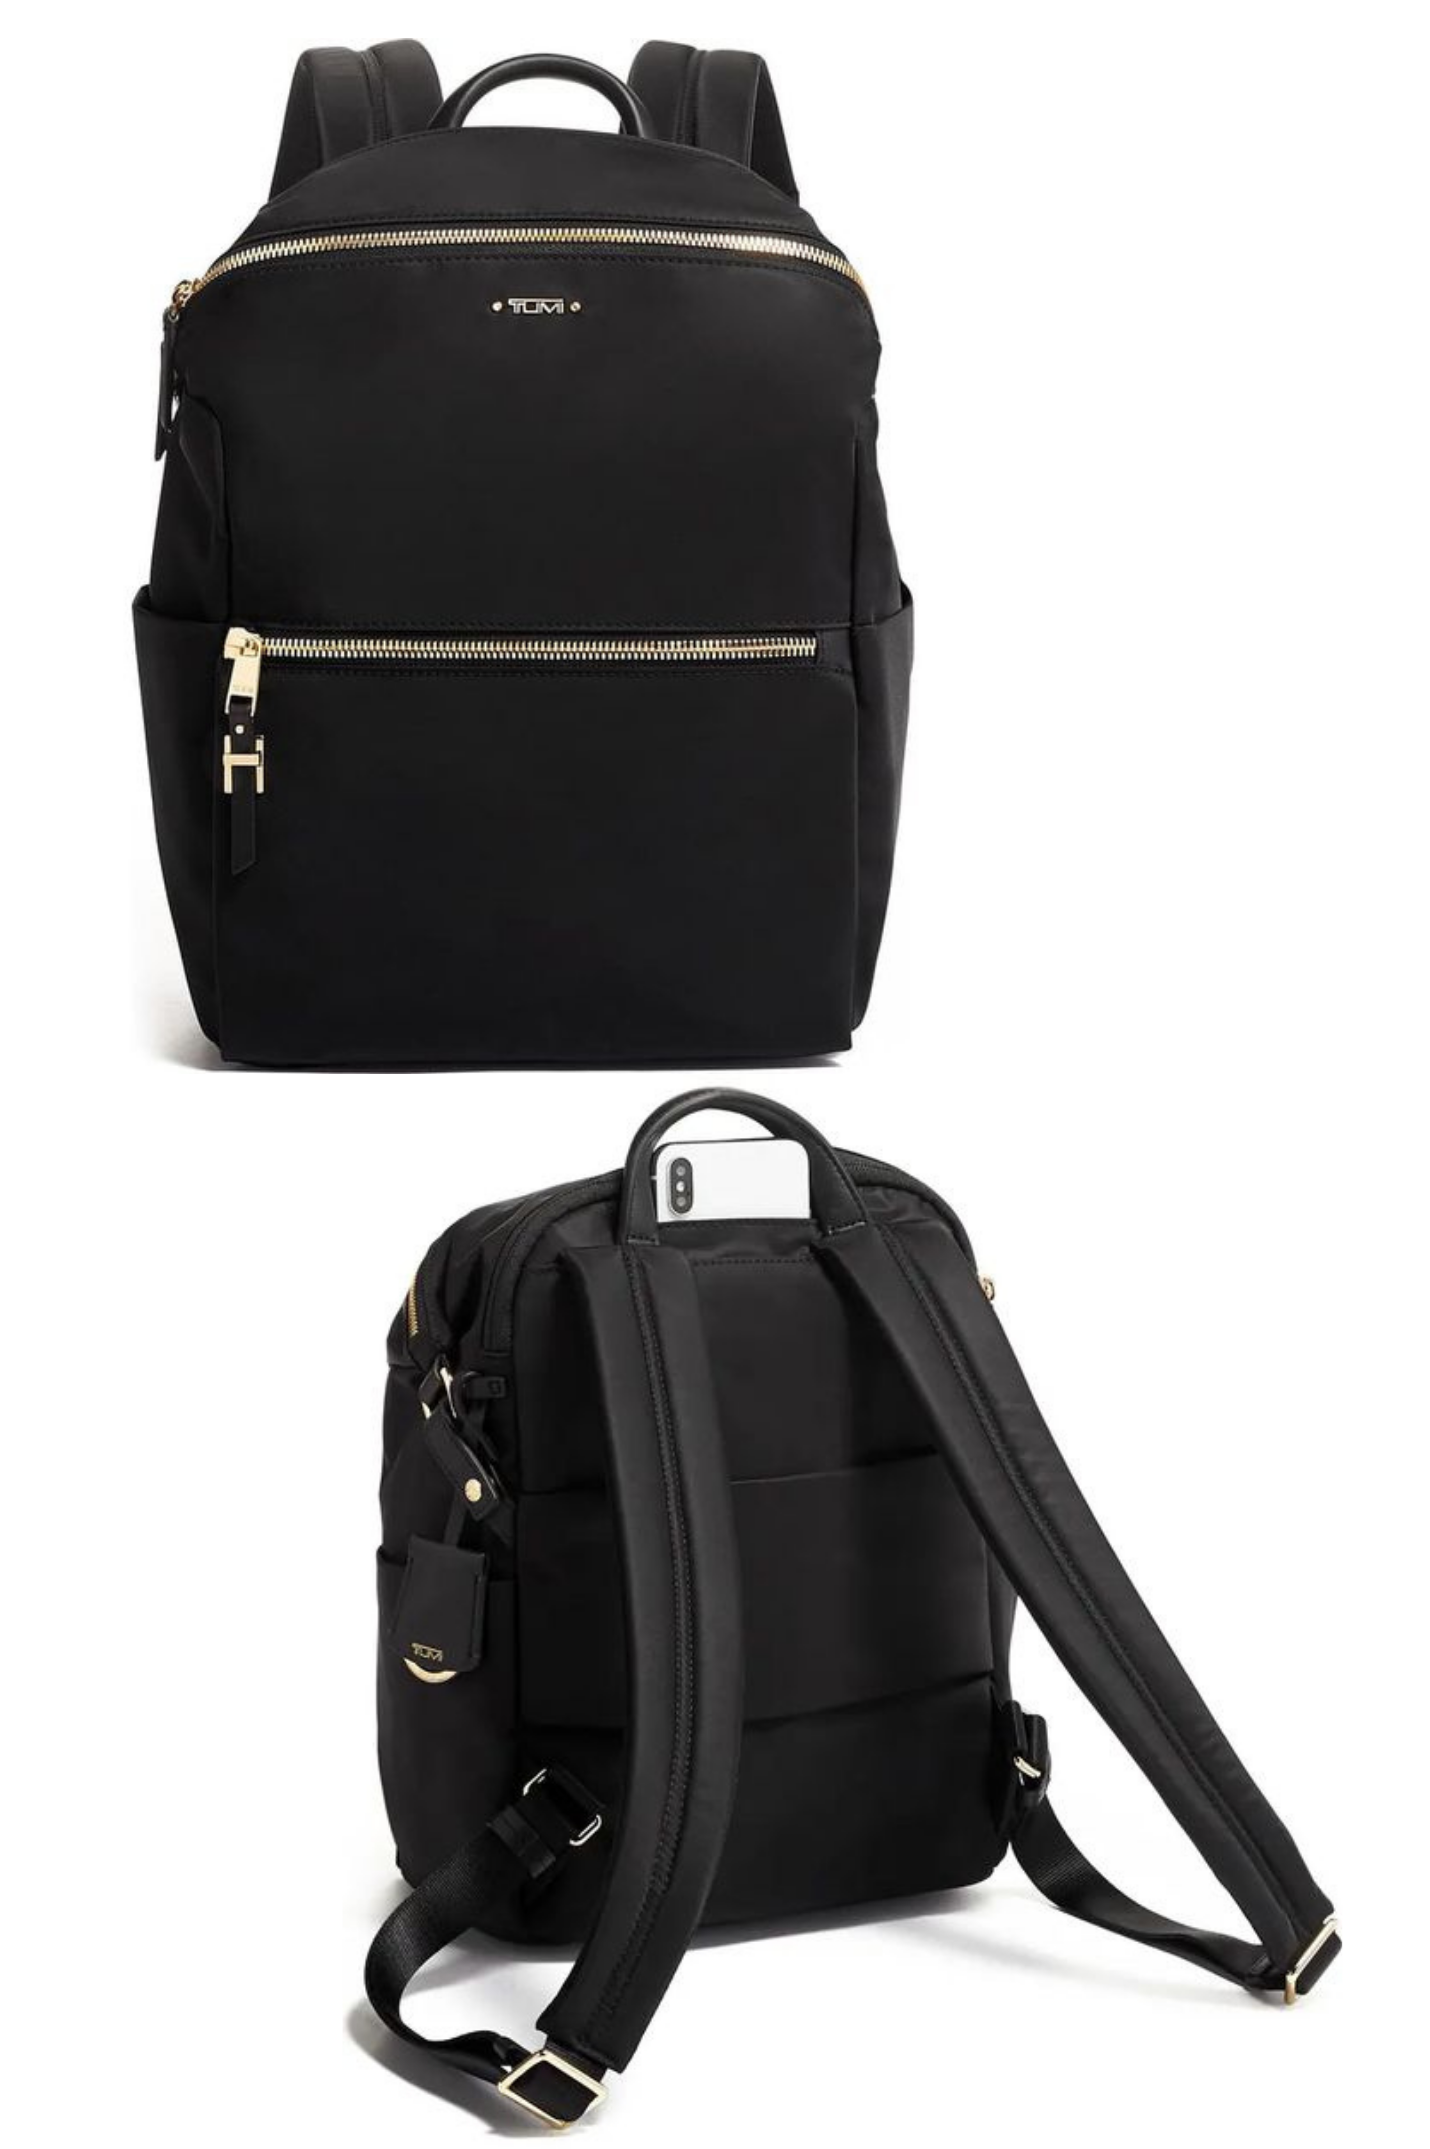 The Tumi Voyageur Patricia Backpack